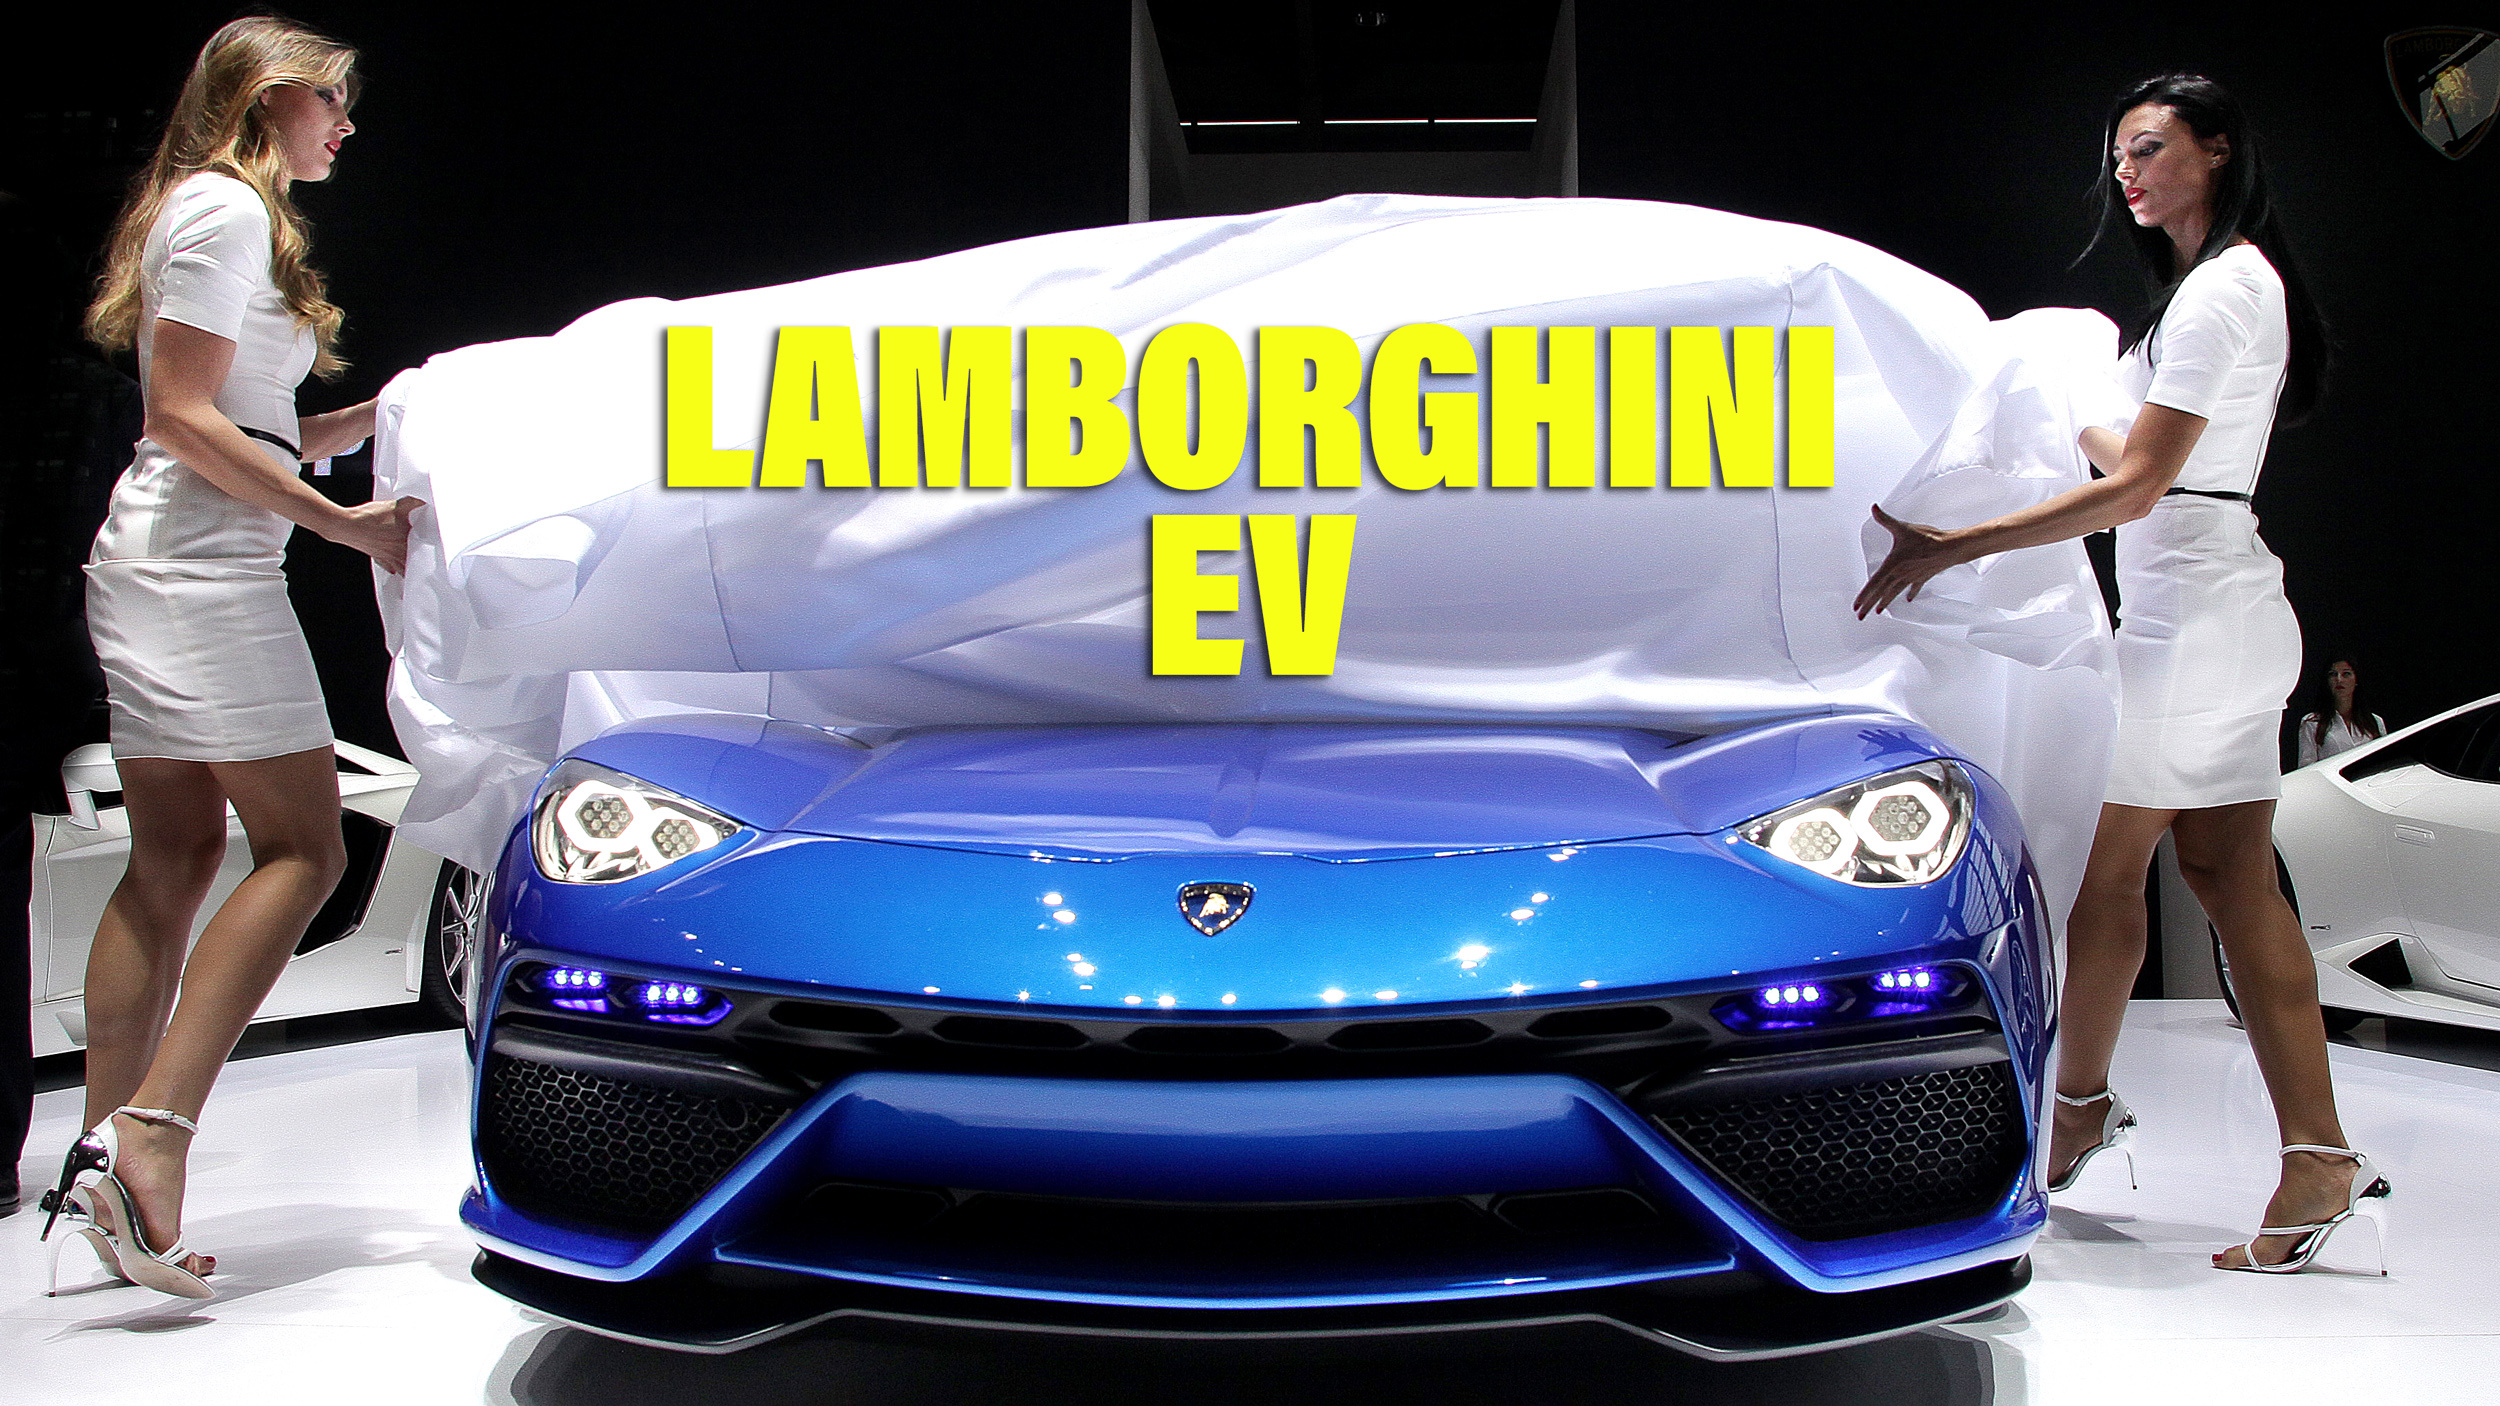 Lamborghini's First EV Will Not Be An SUV But A Sports 2+2 GT, CEO Confirms